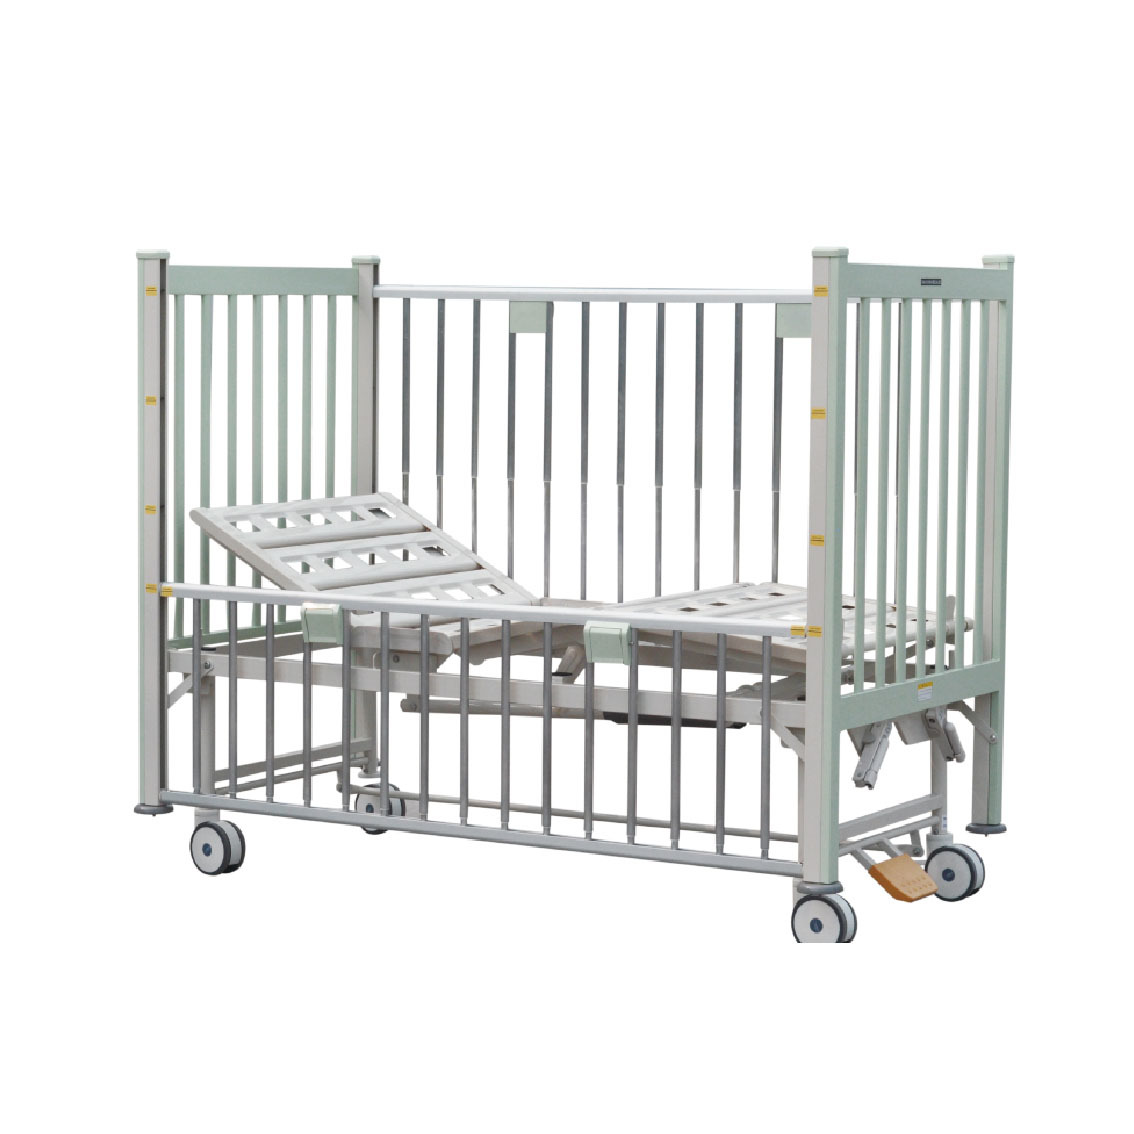 HL-A141C Paediatric bed